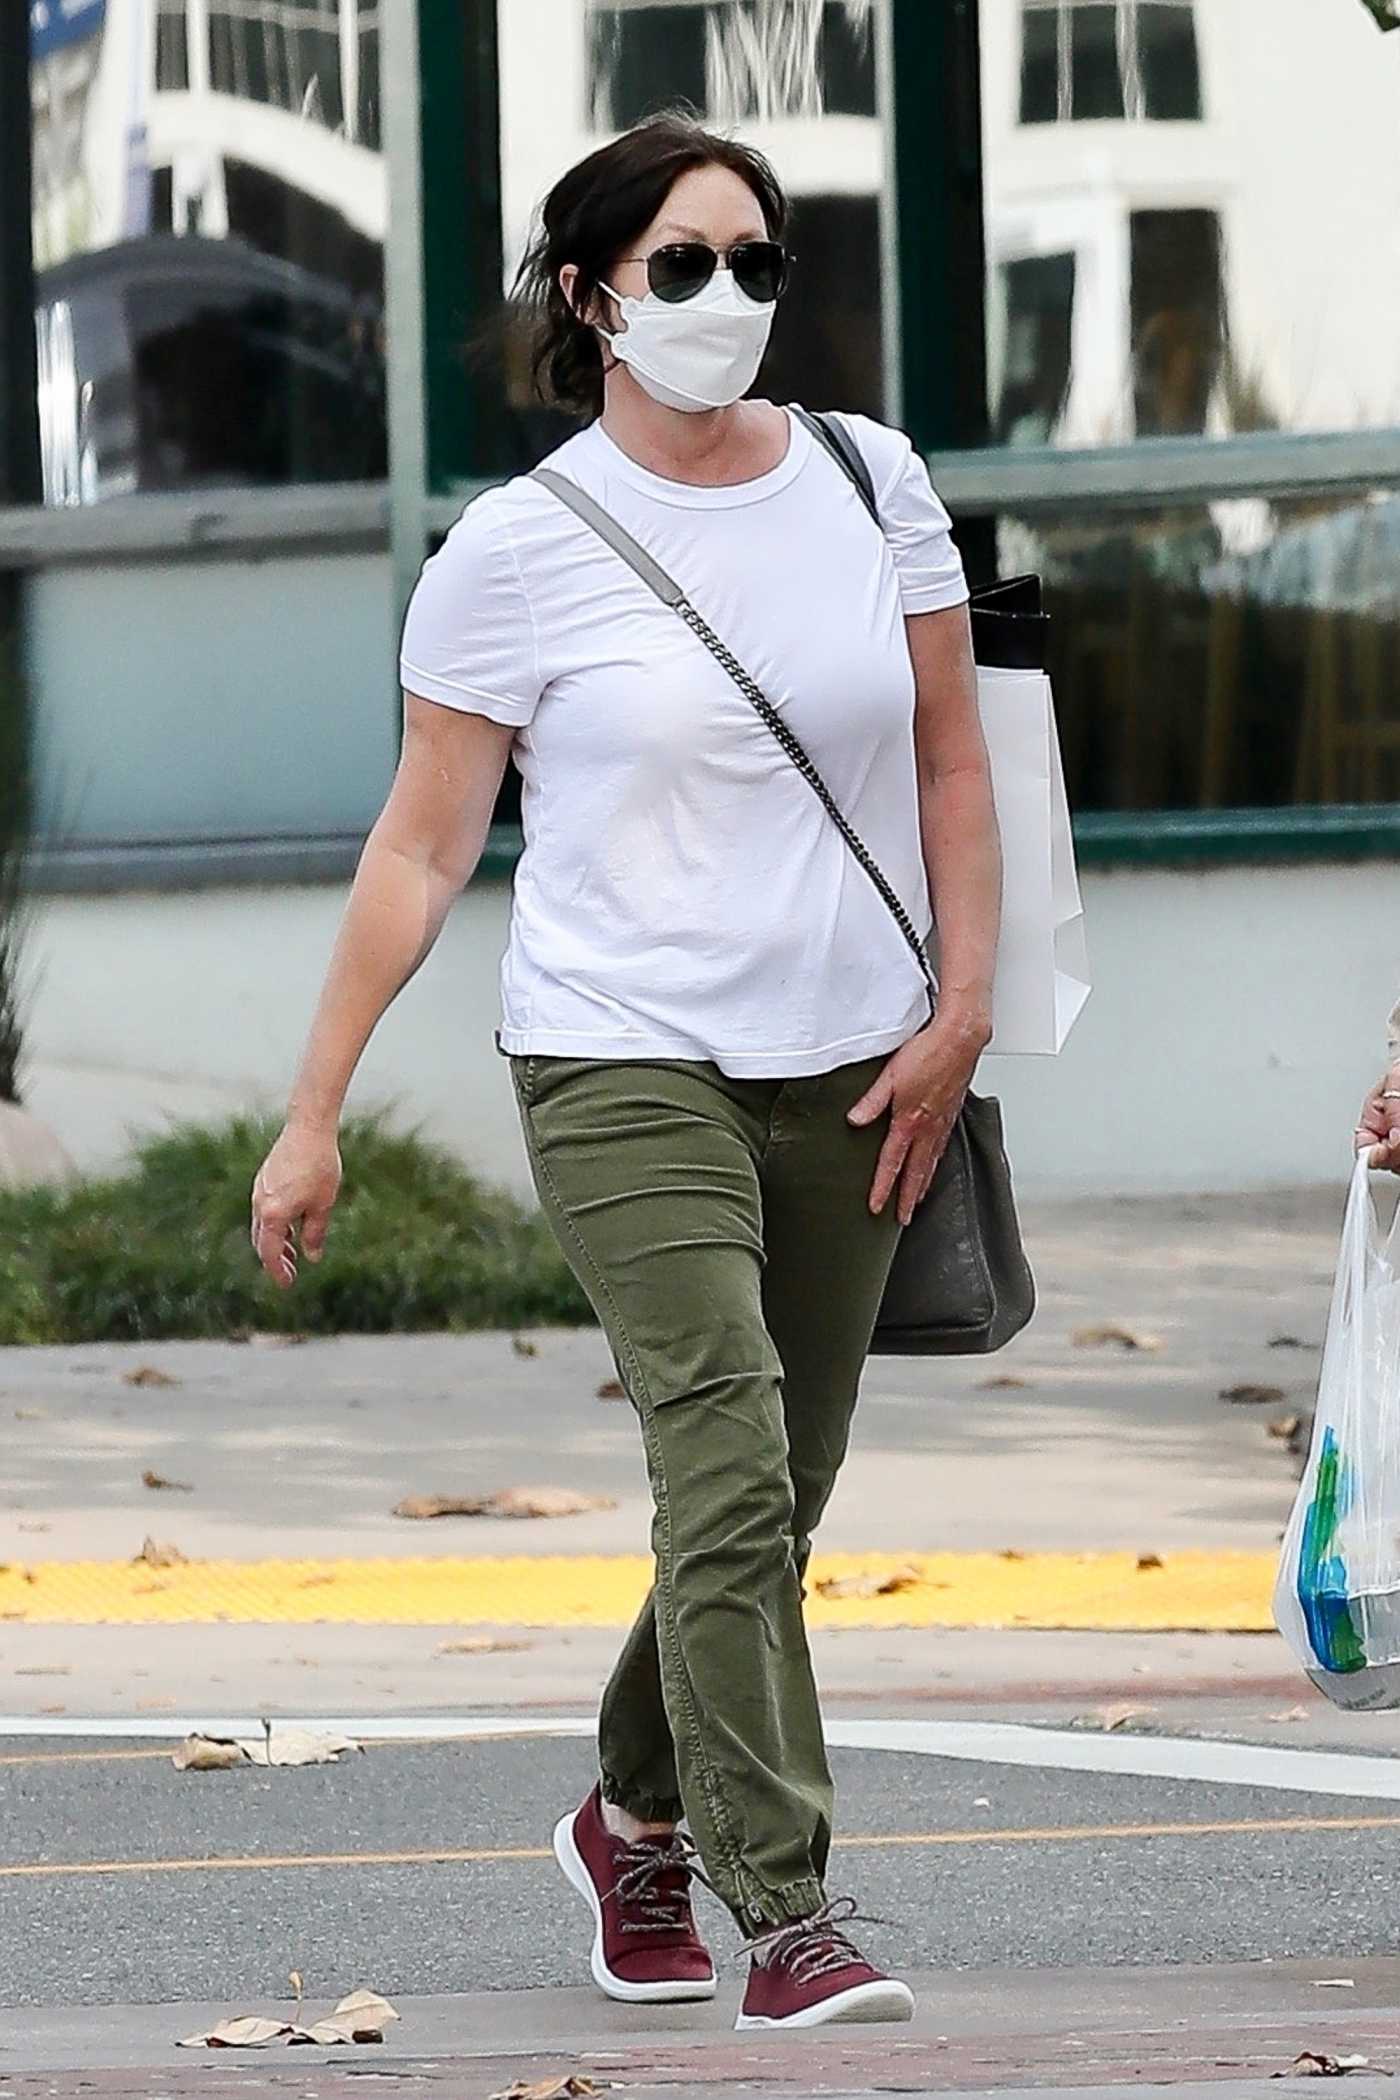 Shannen Doherty in a White Tee Goes Shopping Out with Sarah Michelle Gellar in Malibu 10/05/2020